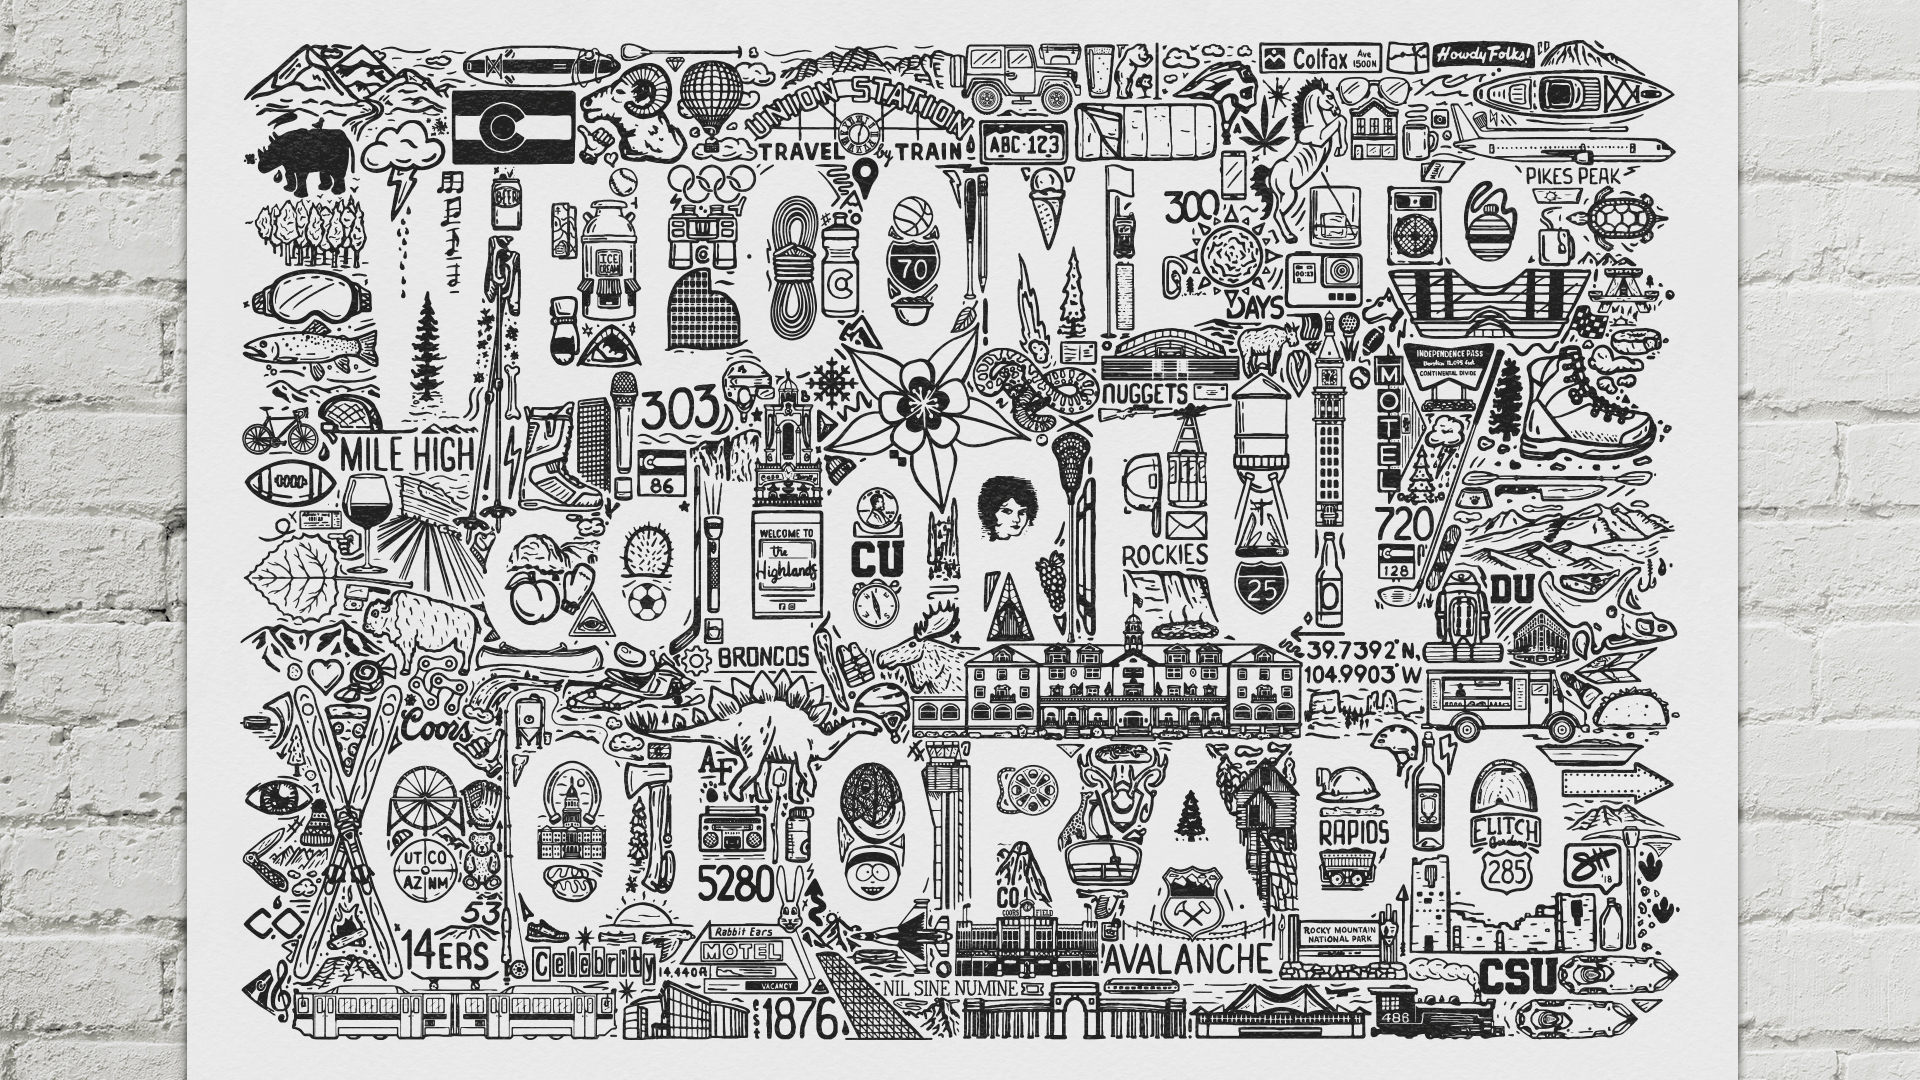 Welcome to Colorado Iconoflage Print